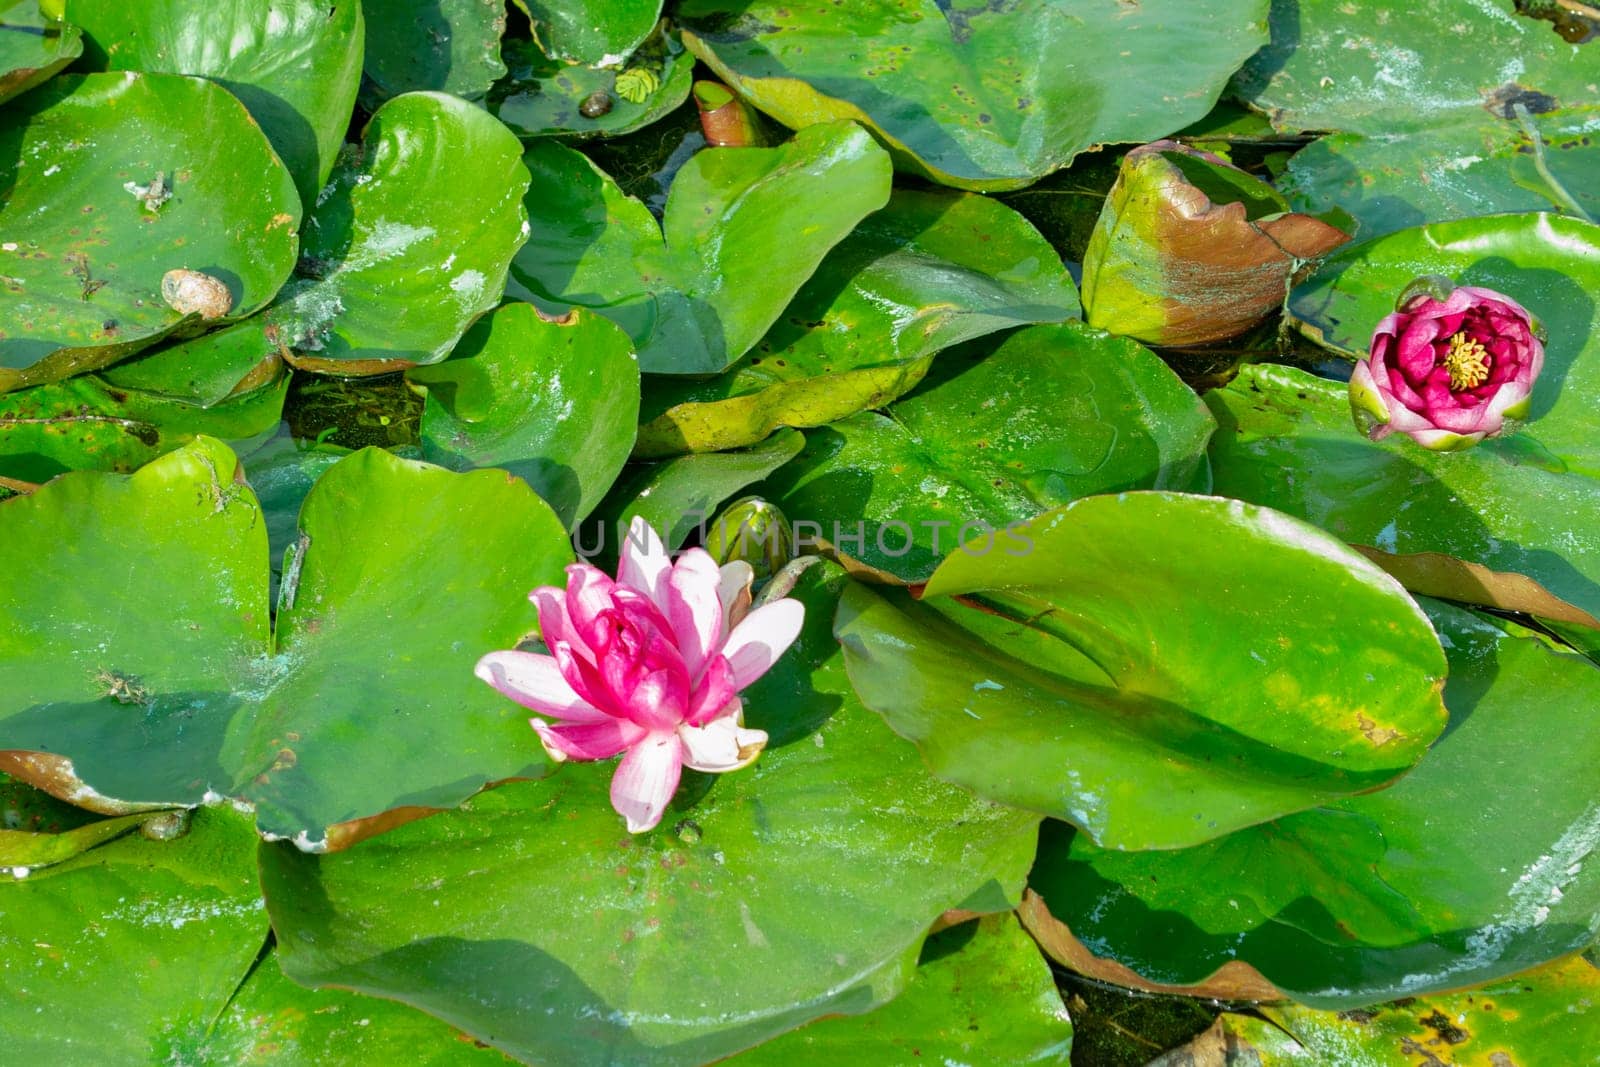 gentle pink flower among the green leaves of water lilies by feoktistova